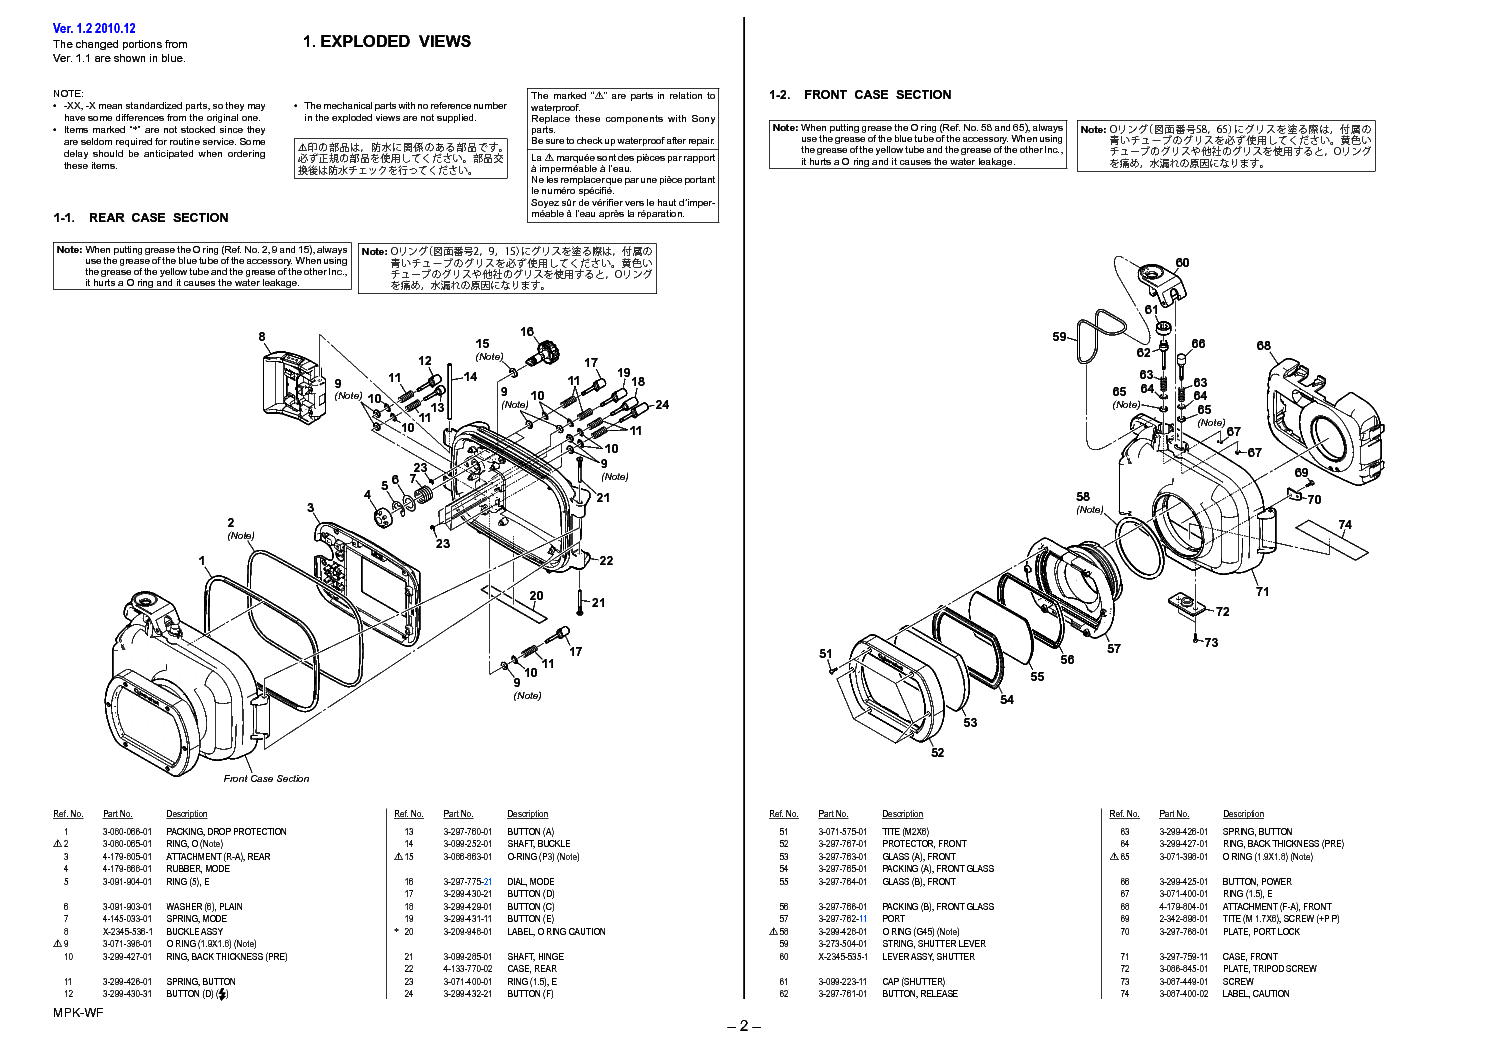 SONY MPK-WF VER-1.2 MARINE-PACK SM service manual (2nd page)